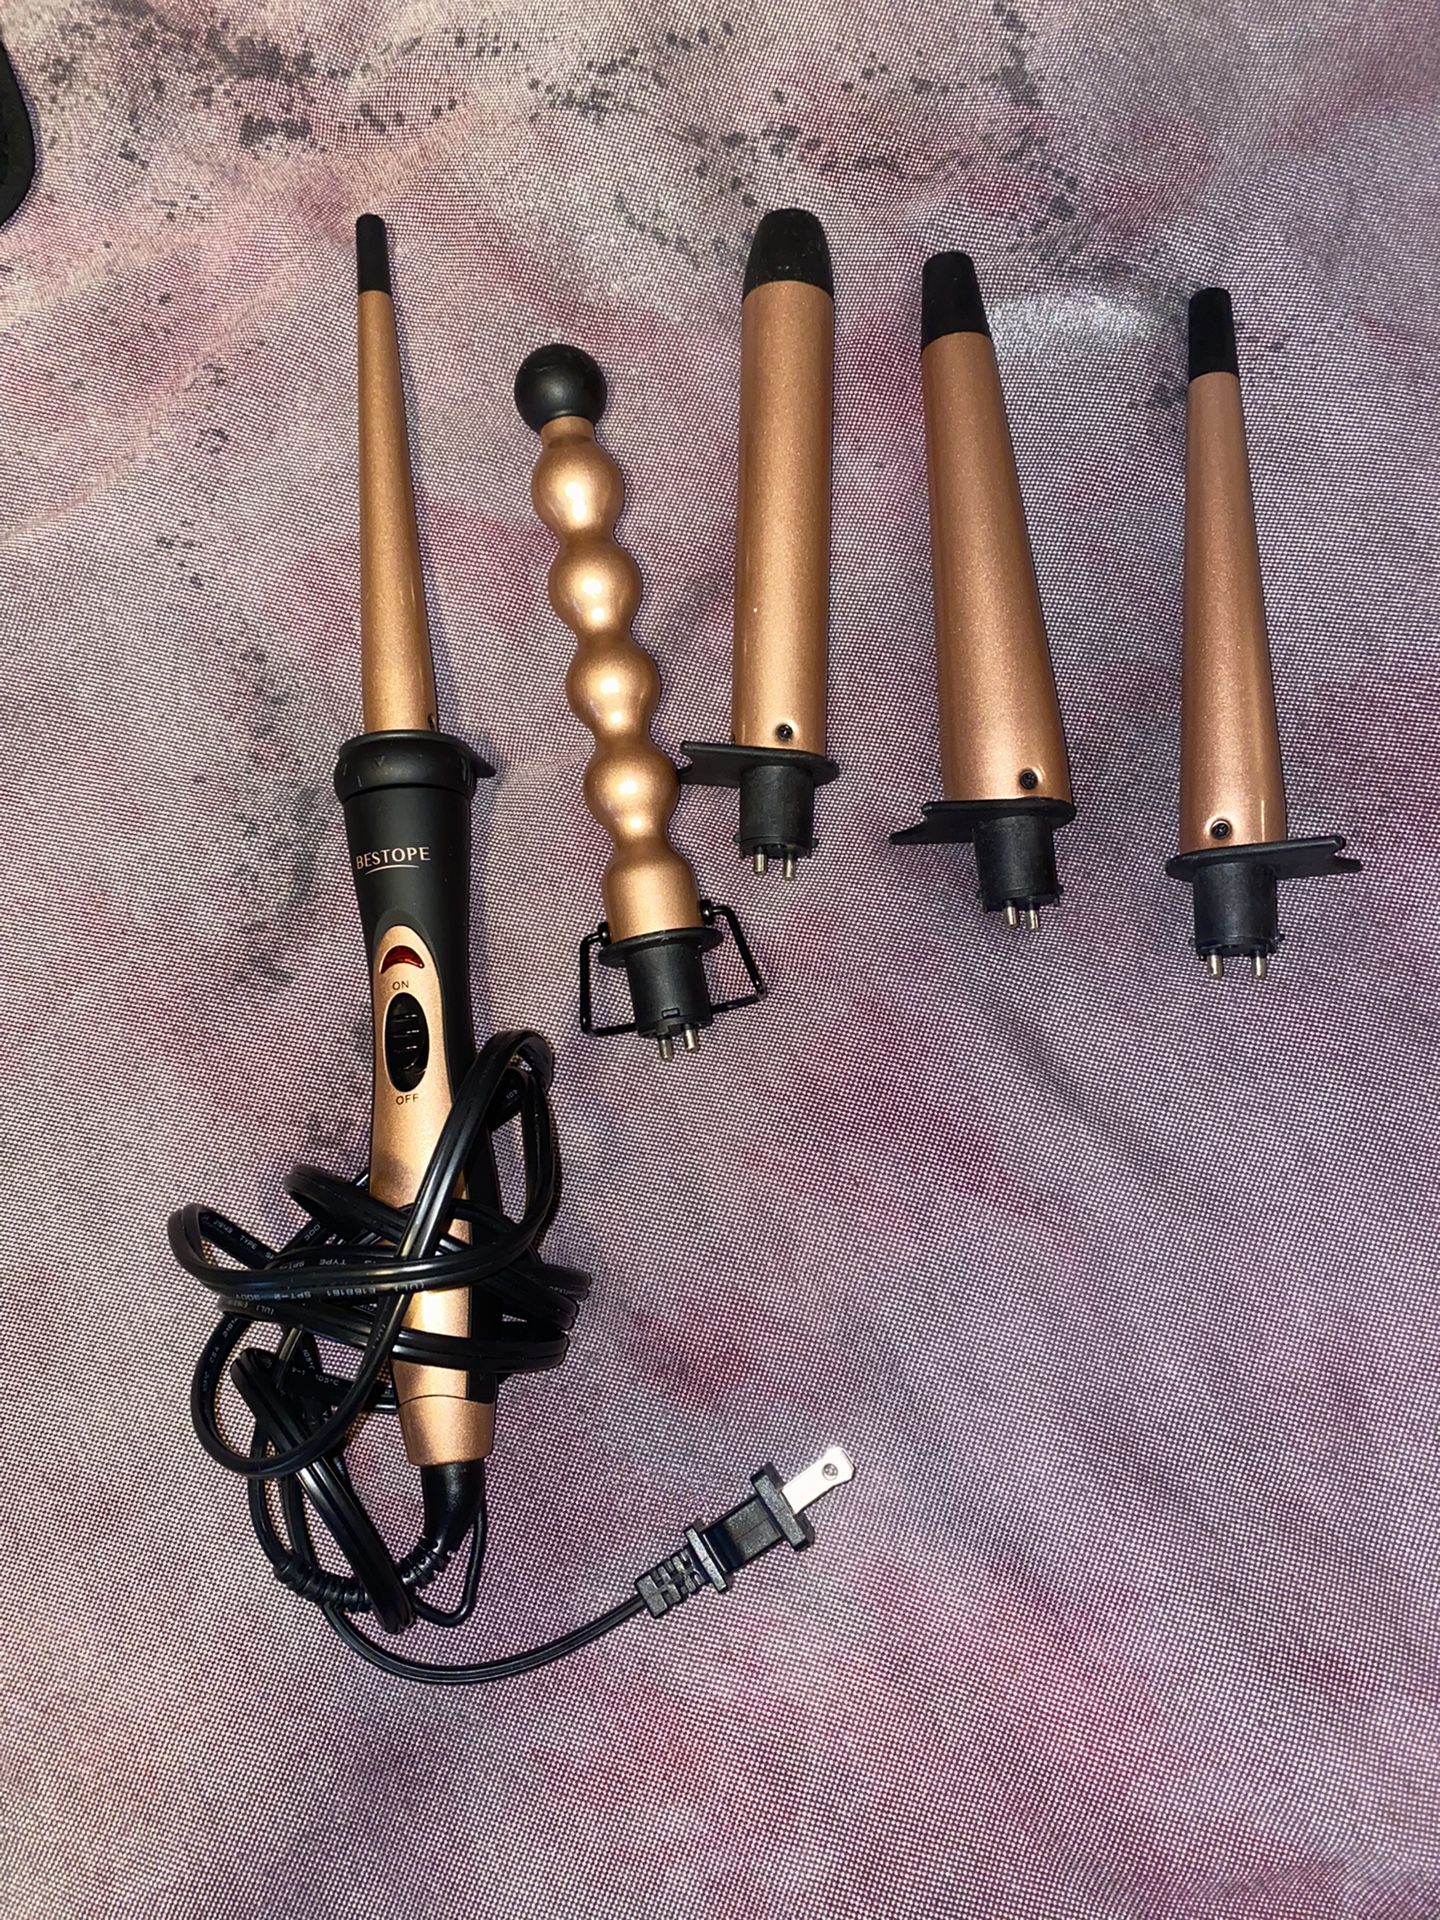  5 in 1 Advanced Titanium Curling Iron Wand Set with 5 Interchangeable Barrels Hair Curlers 